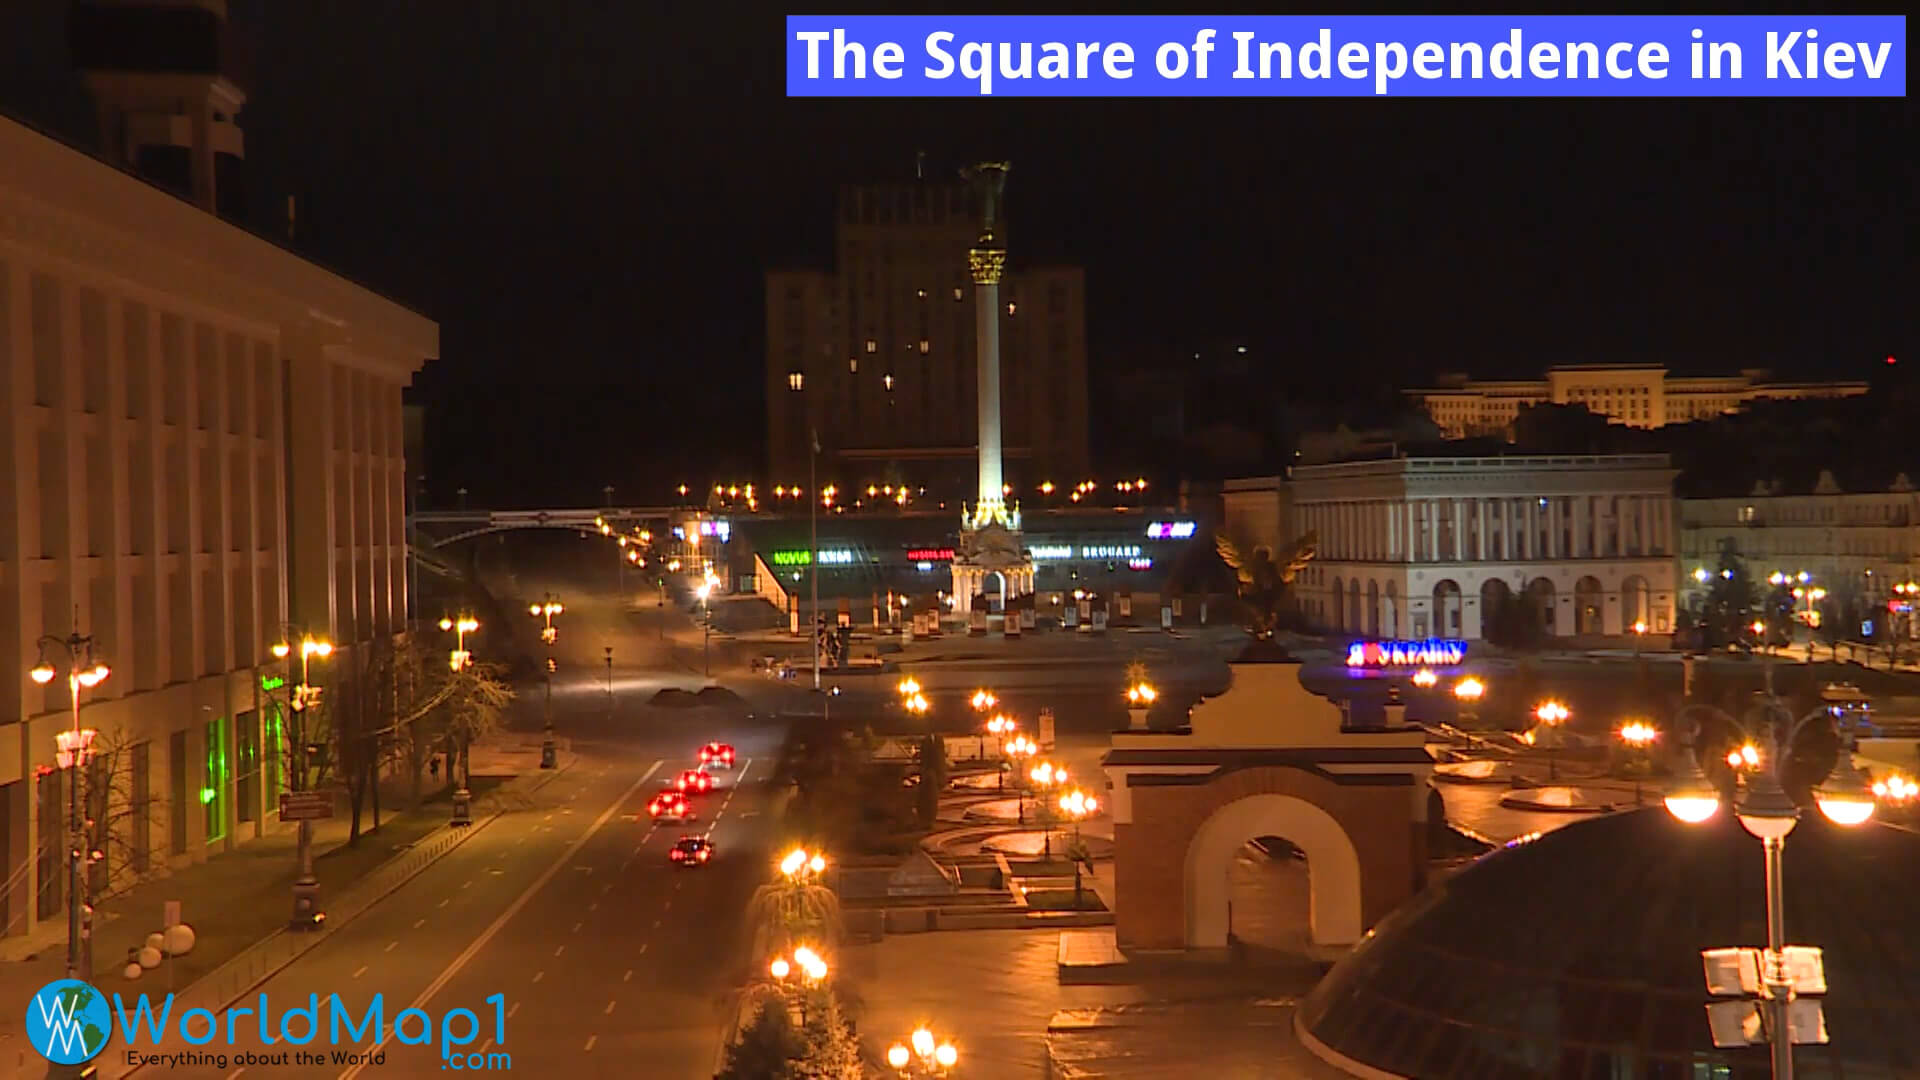 The Square of Independence in Kiev